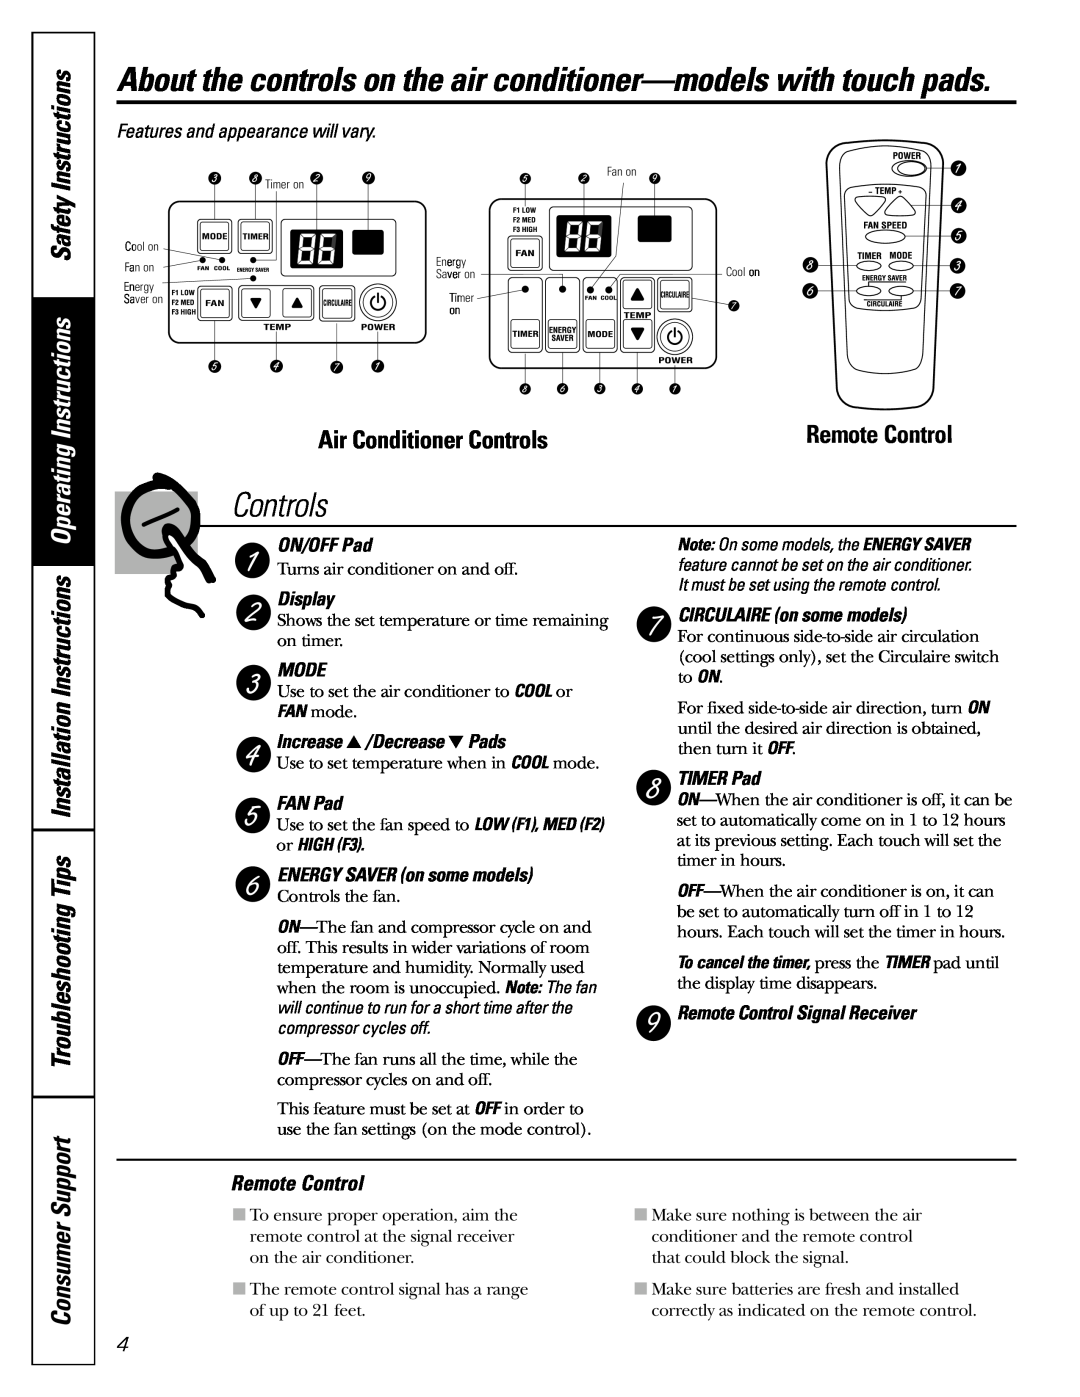 GE AGF10 Consumer Support, Air Conditioner Controls, Remote Control, ON/OFF Pad, Display, Mode, Increase /Decrease Pads 